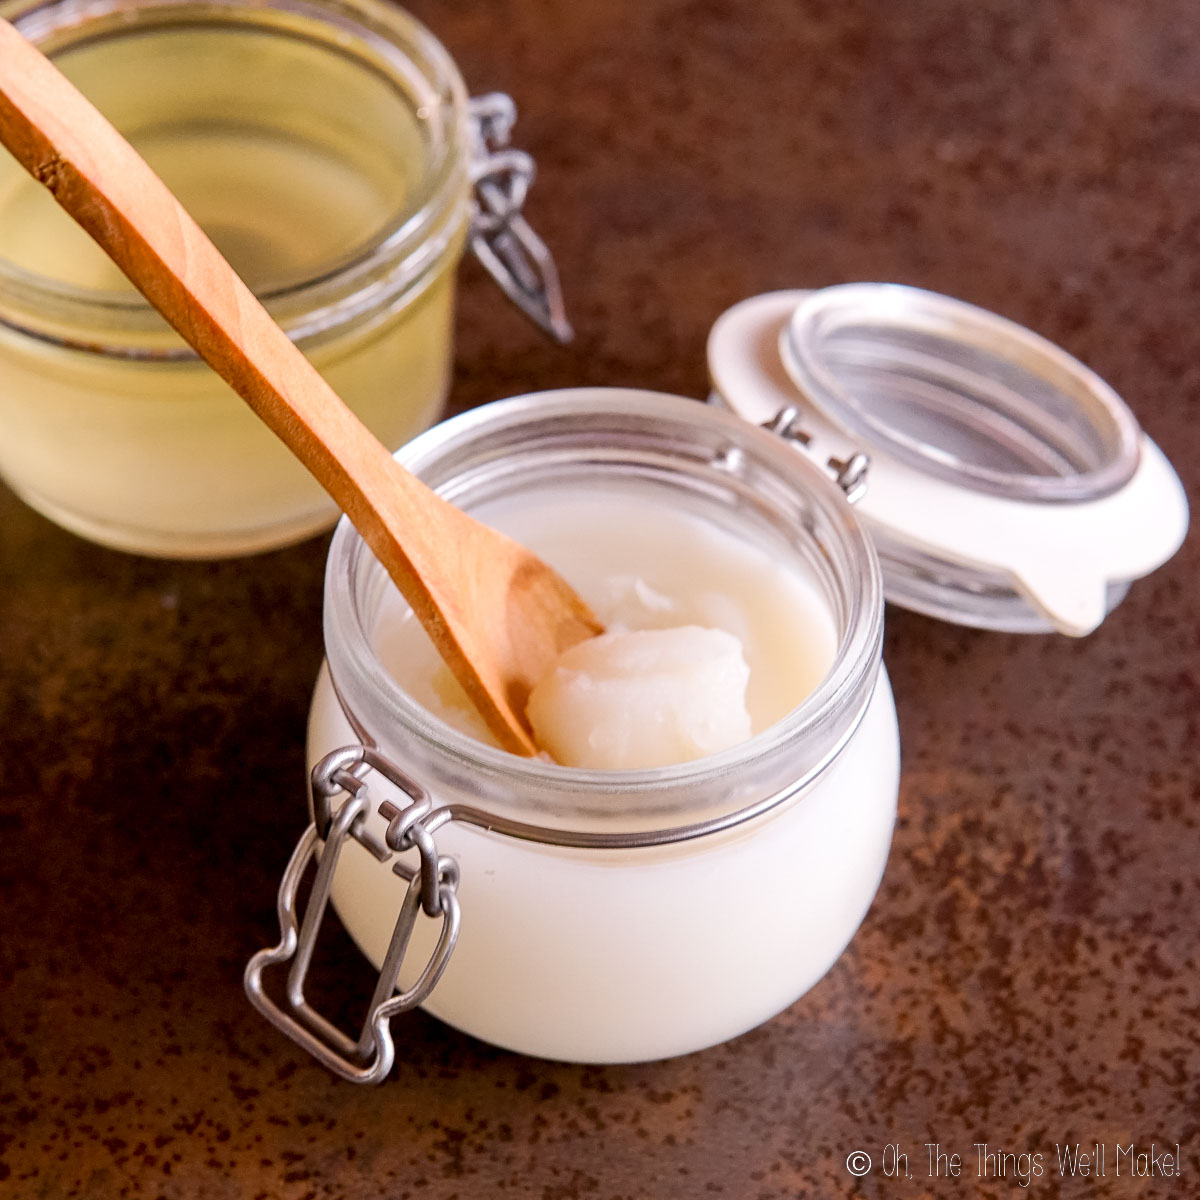 Beef tallow in a jar with a wooden spoon